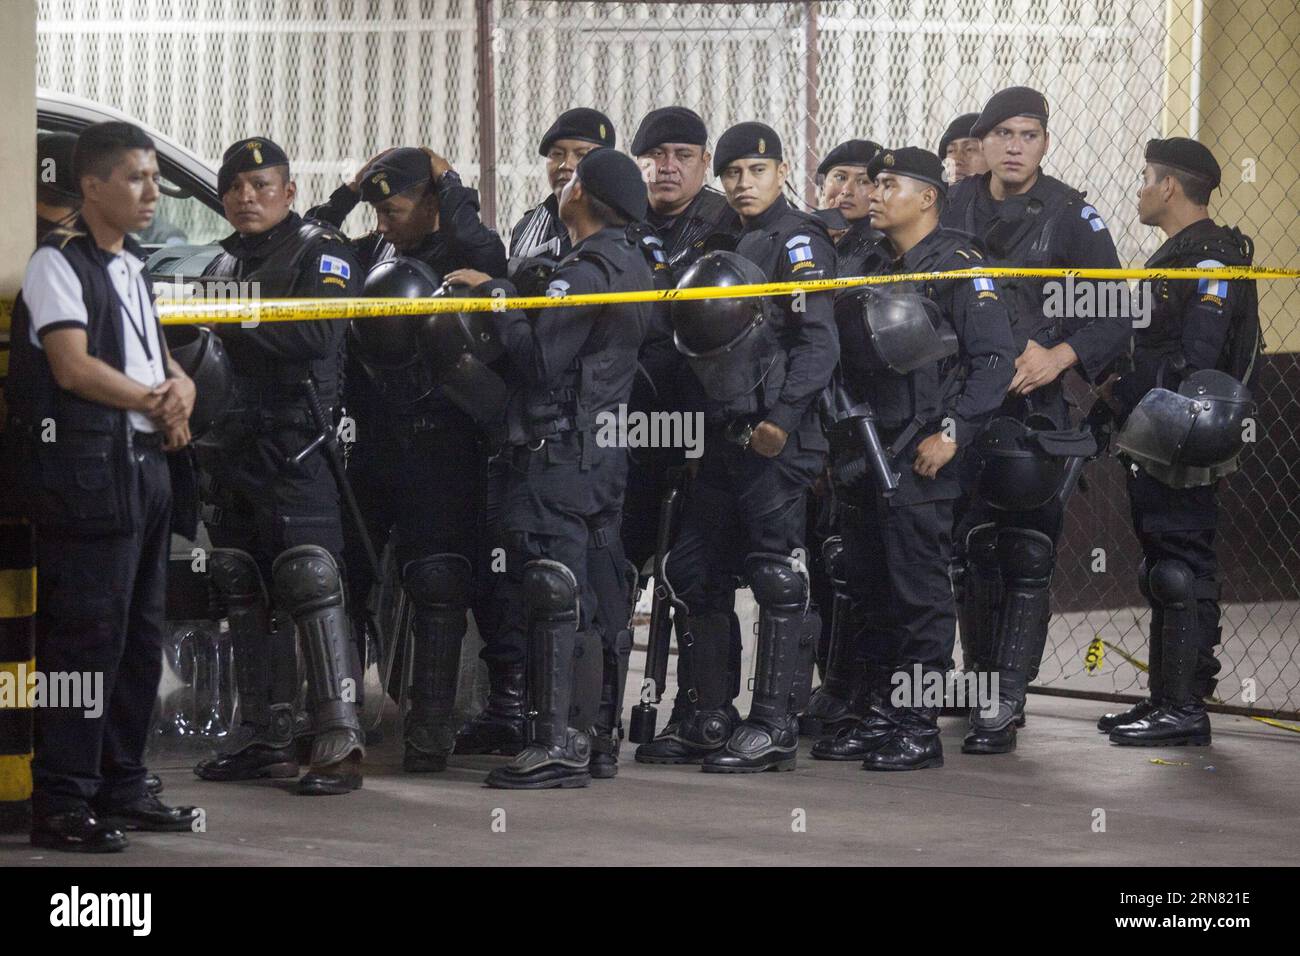 (150930) -- GUATEMALA CITY, Sept. 30, 2015 -- National Civil Police Special Forces agents stand guard in the Tower of Courts, in Guatemala City, capital of Guatemala, Sept. 30, 2015. A gang member was killed and two others wounded by rival gangsters of Barrio 18 and Mara Salvatrucha while they were held under custody in the Tower of Courts basement, located in the Civic Center of the Guatemalan capital, according to local press information.Luis Echeverria) (jg) (sp) GUATEMALA-GUATEMALA CITY-VIOLENCE e LuisxEcheverria PUBLICATIONxNOTxINxCHN   Guatemala City Sept 30 2015 National Civil Police Sp Stock Photo